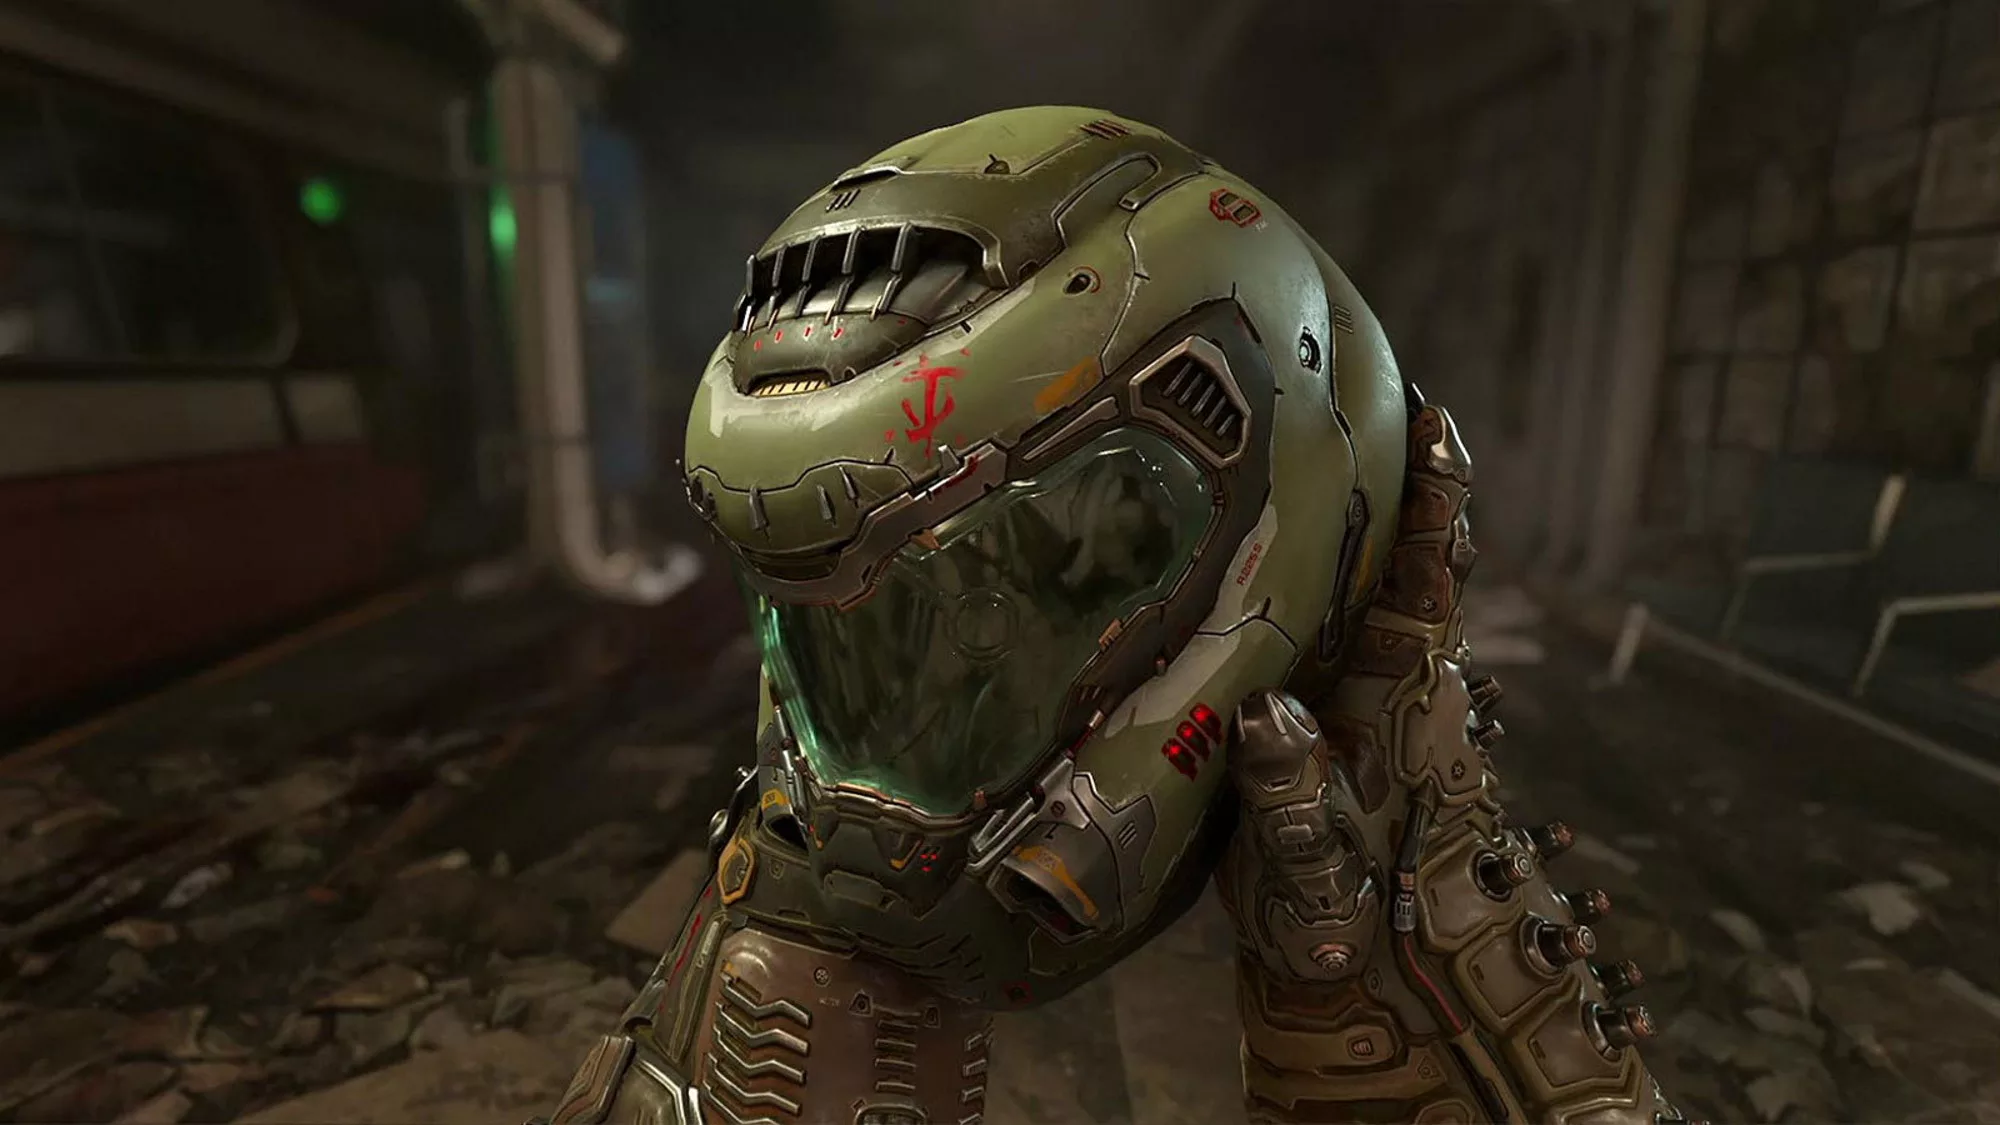 Image of Doom Guy holding his helmet, with the visor facing the character from the game Doom Eternal.